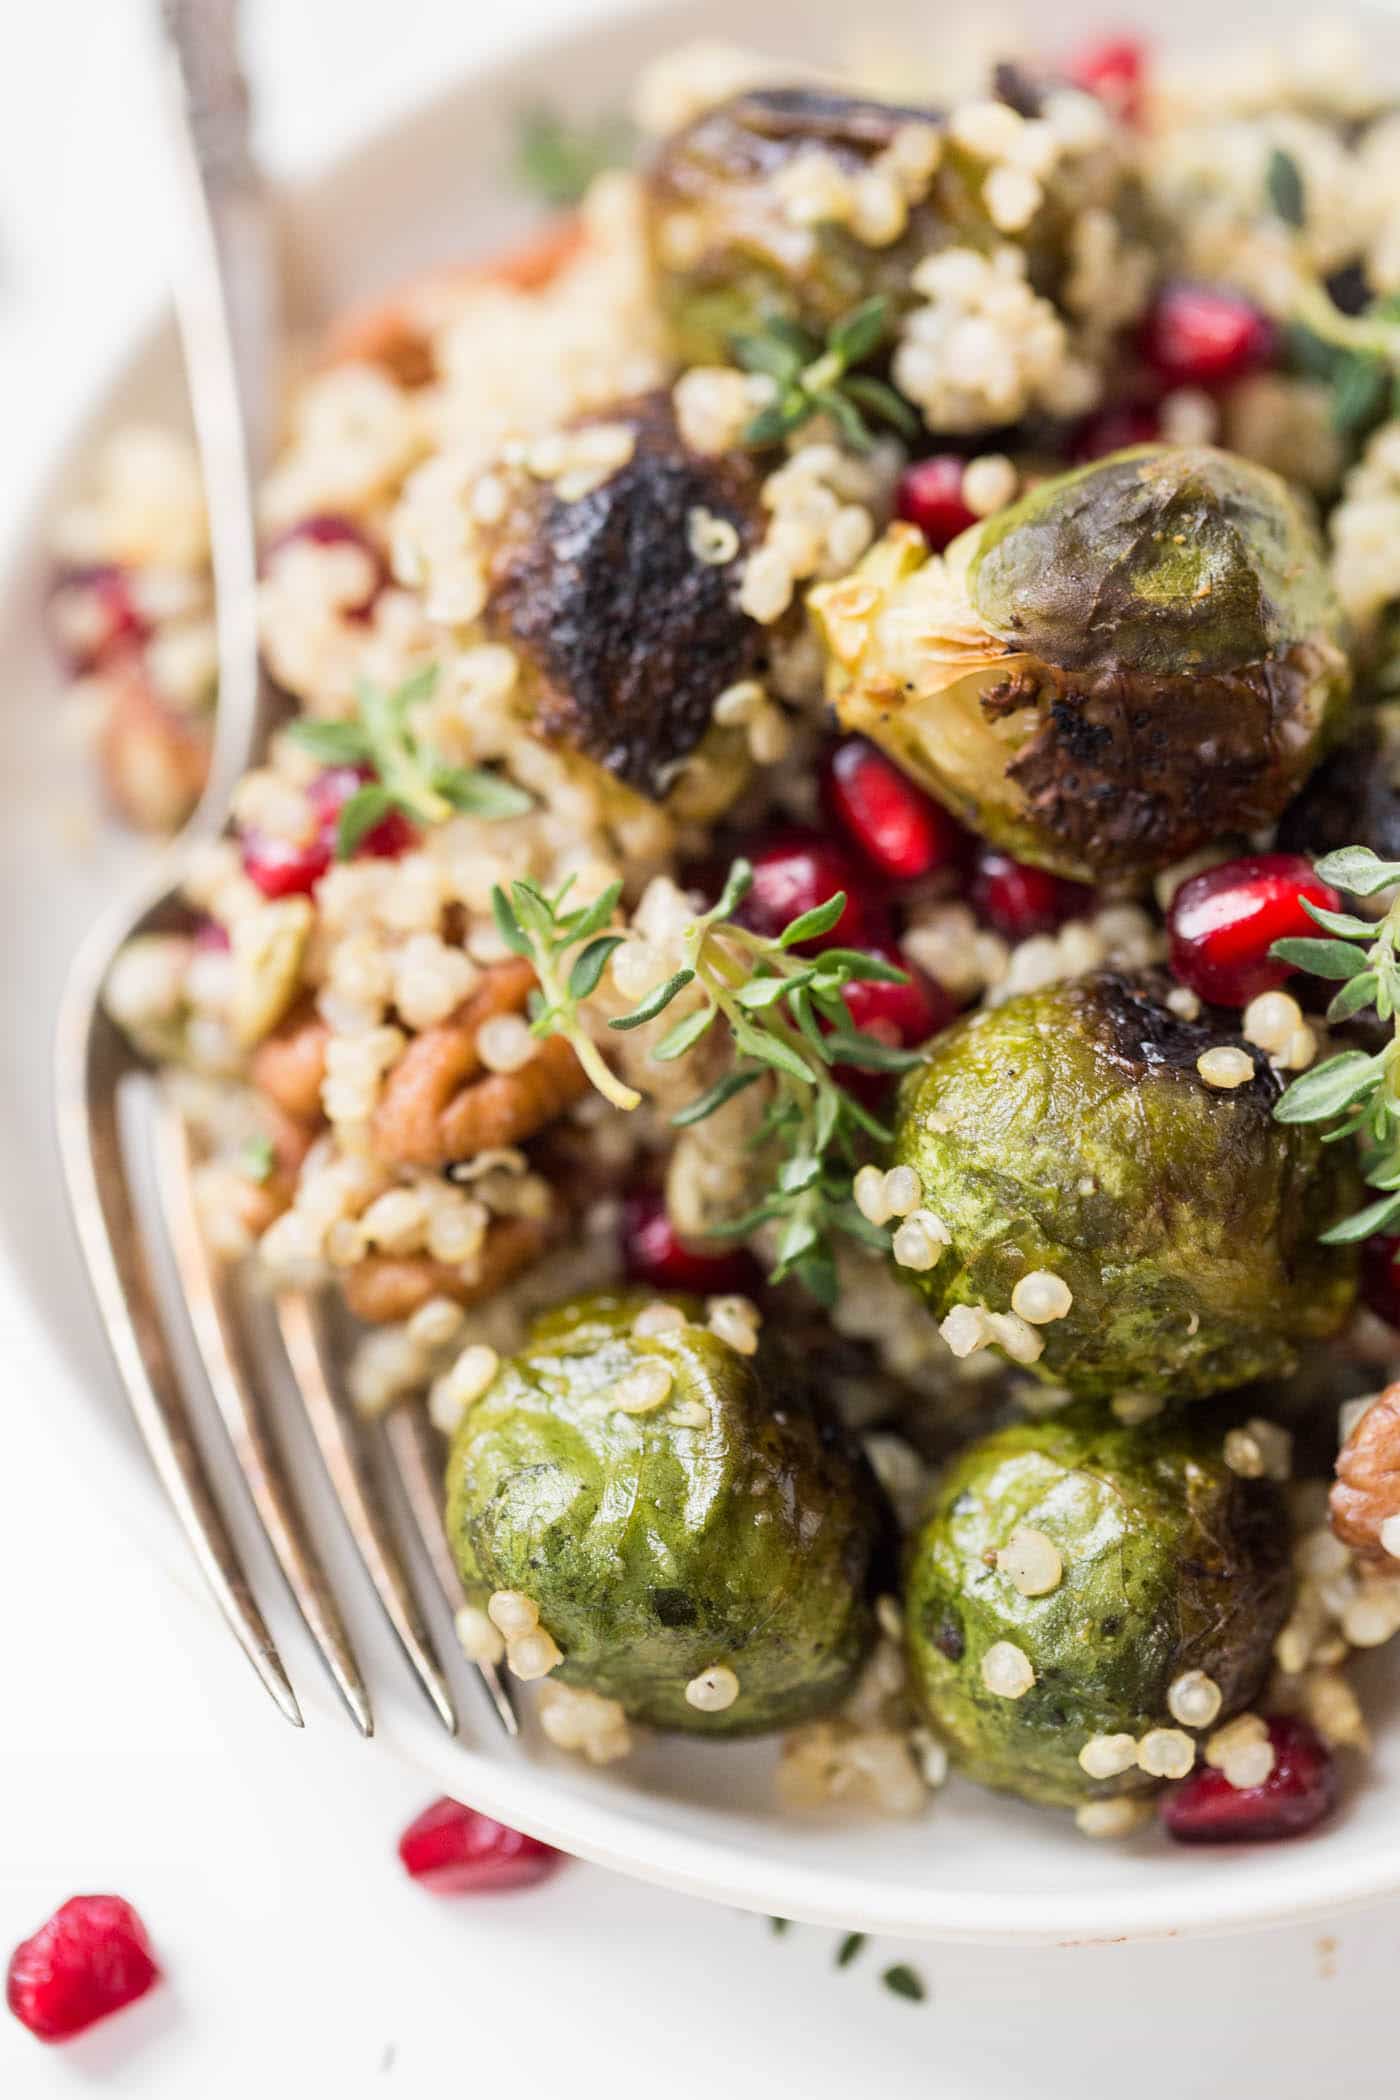 This AMAZING Roasted Brussels Sprout Quinoa Salad is the perfect side dish for your holiday feast. Simple, pretty, and oh so flavorful!